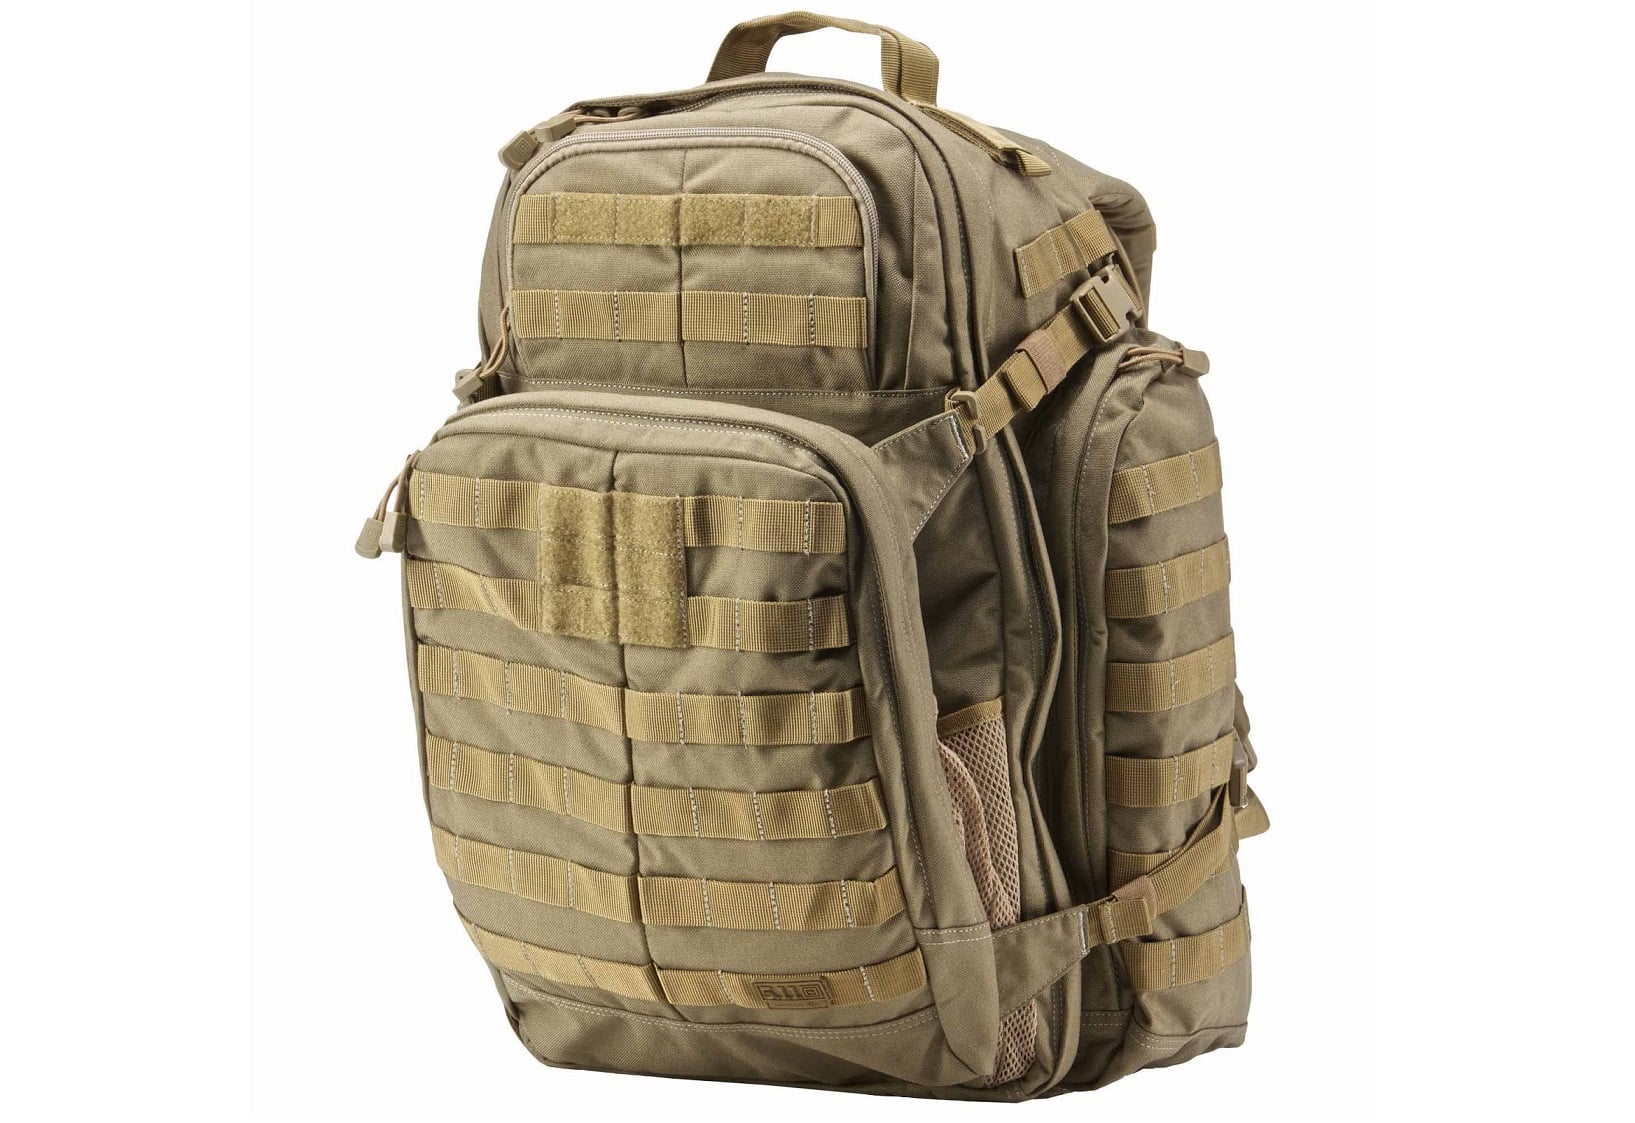 Bug Out Bag: Complete List of Essential Items